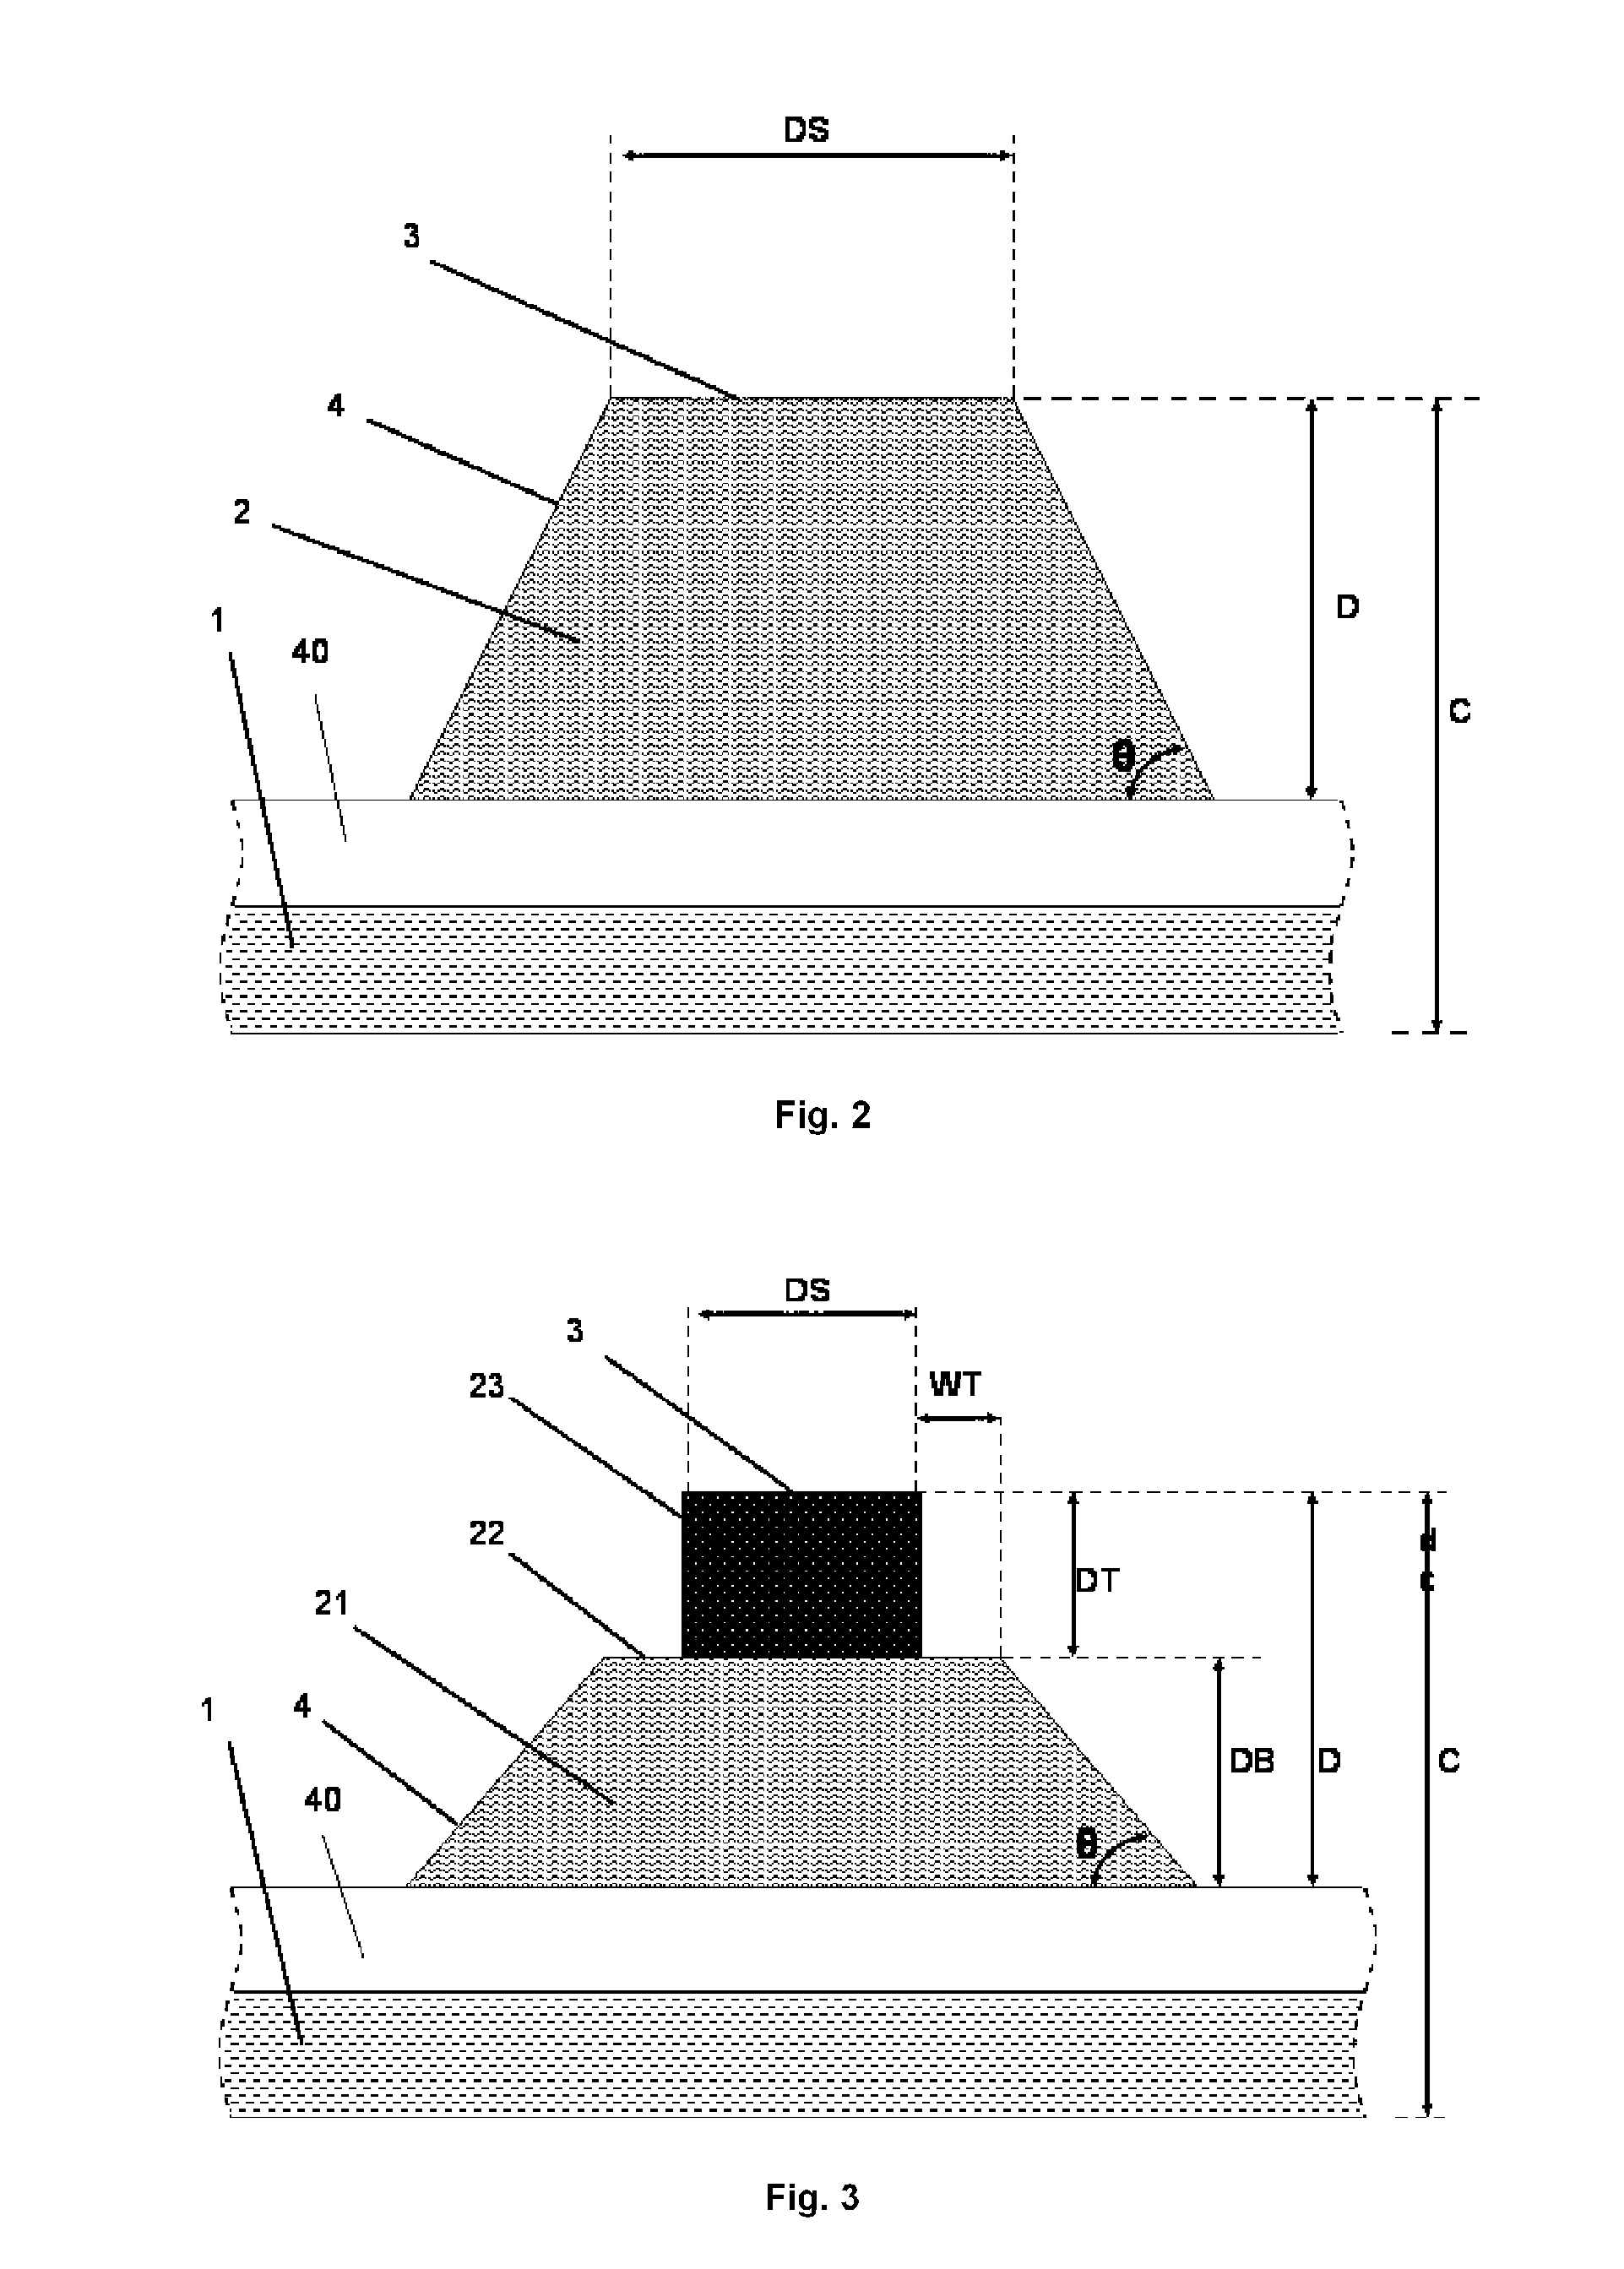 Imaging apparatus and method for making flexographic printing masters